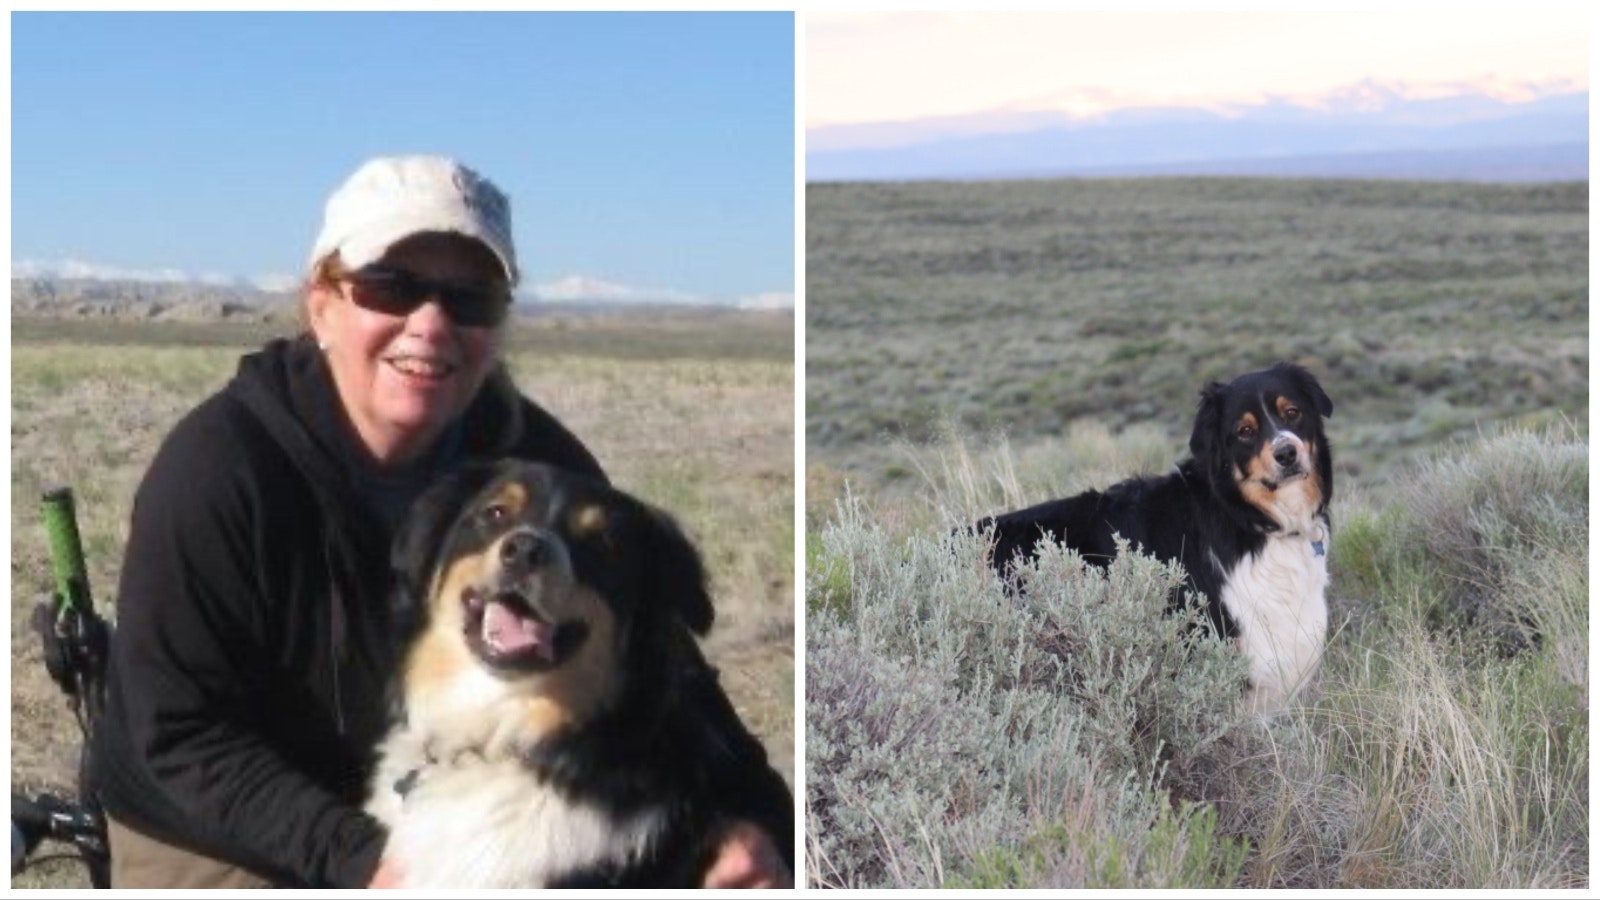 Amber Travsky’s Australian shepherd "Dobby” is her constant companion on outdoor adventures all over Wyoming.